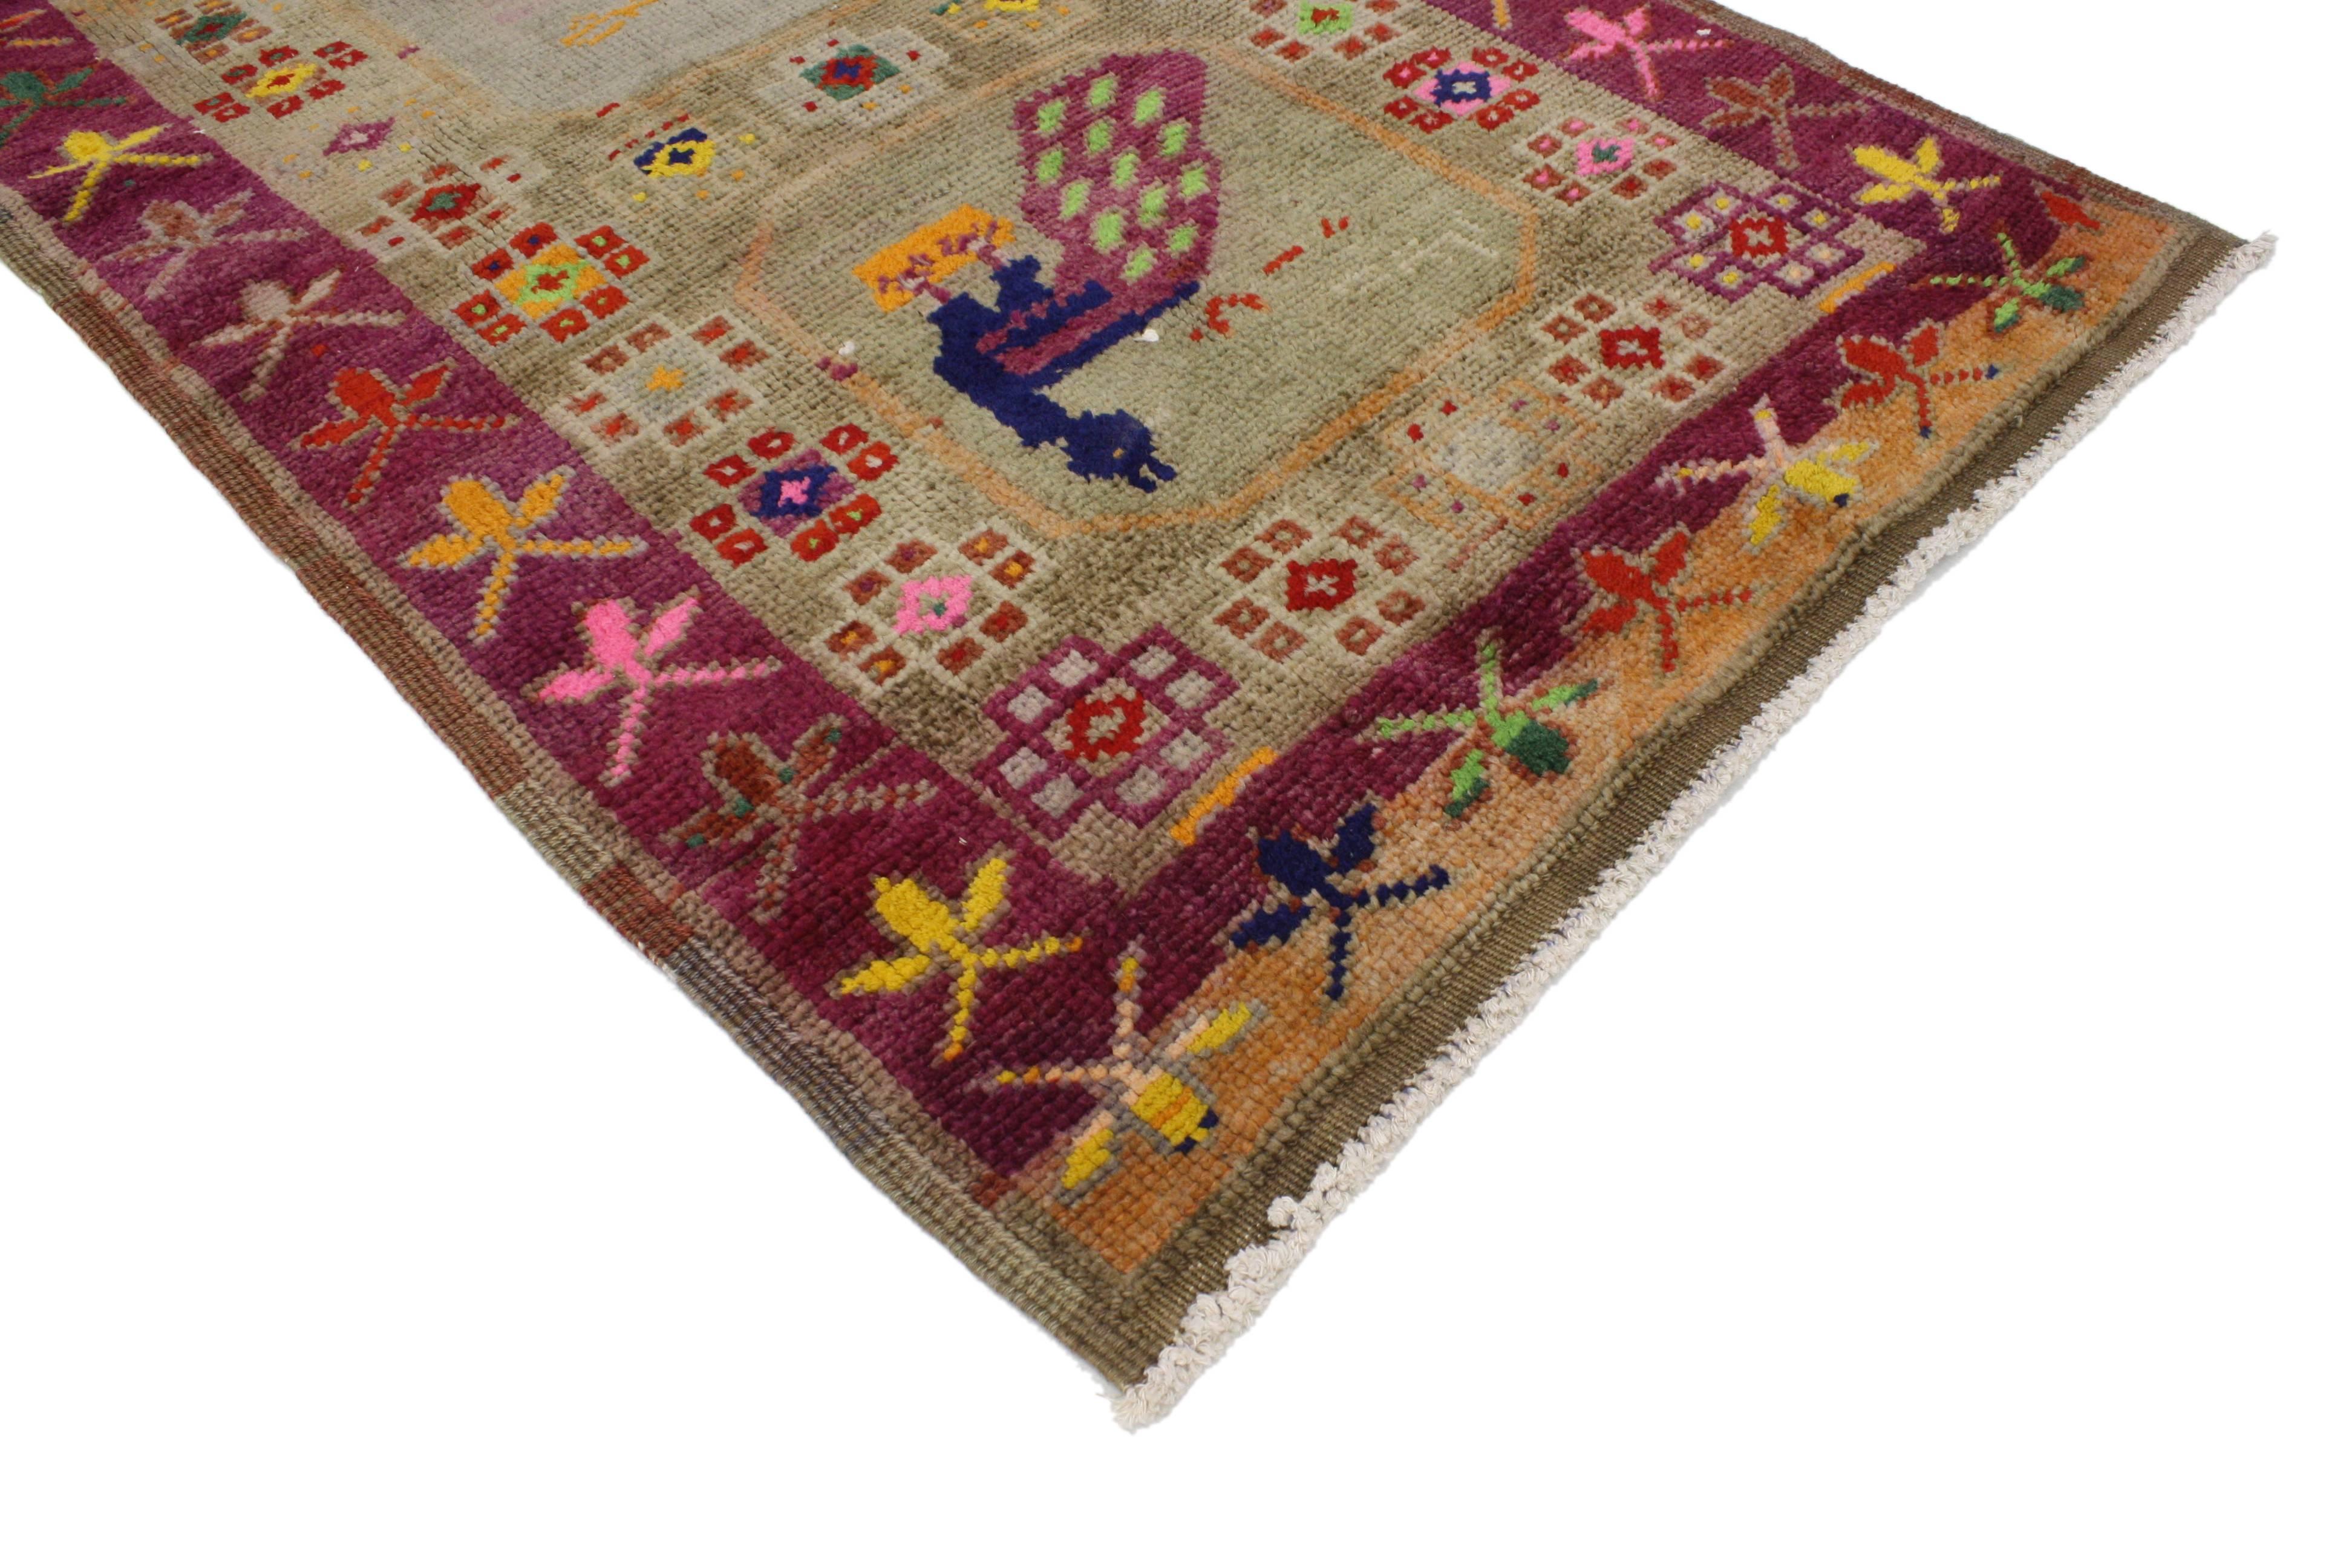 This highly desirable vintage Turkish Oushak runner with modern tribal style features a row of 7 compartments filled with peacocks illuminating its lively, composition. Robust waves of abrash sweep across the abrashed field, enhancing the depth to